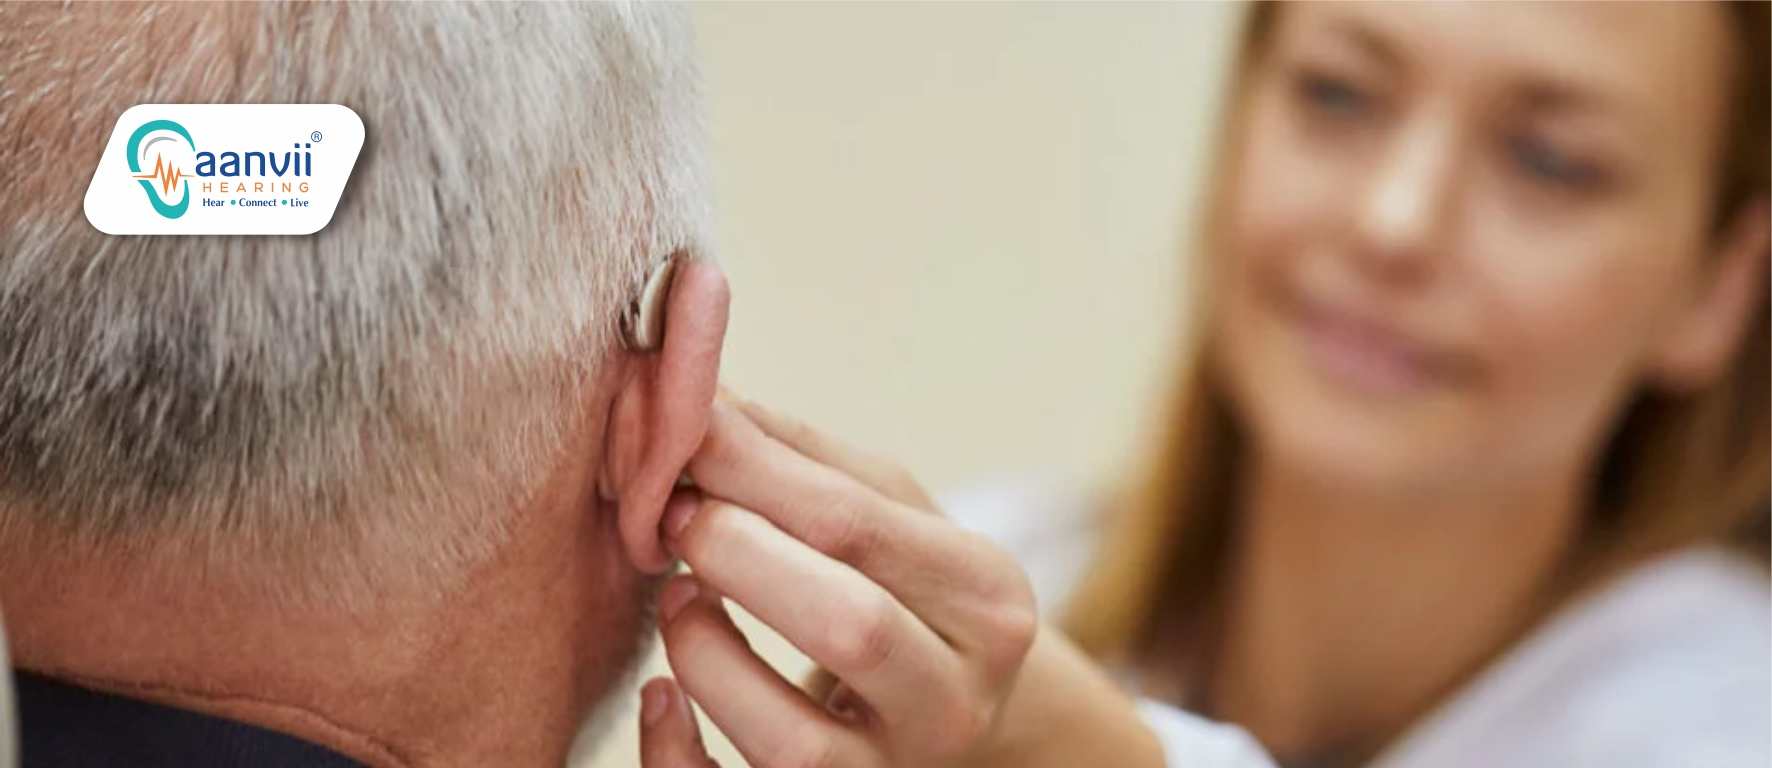 Hearing Loss Basic Facts: Understanding, Causes, and Solutions | Aanvii Hearing